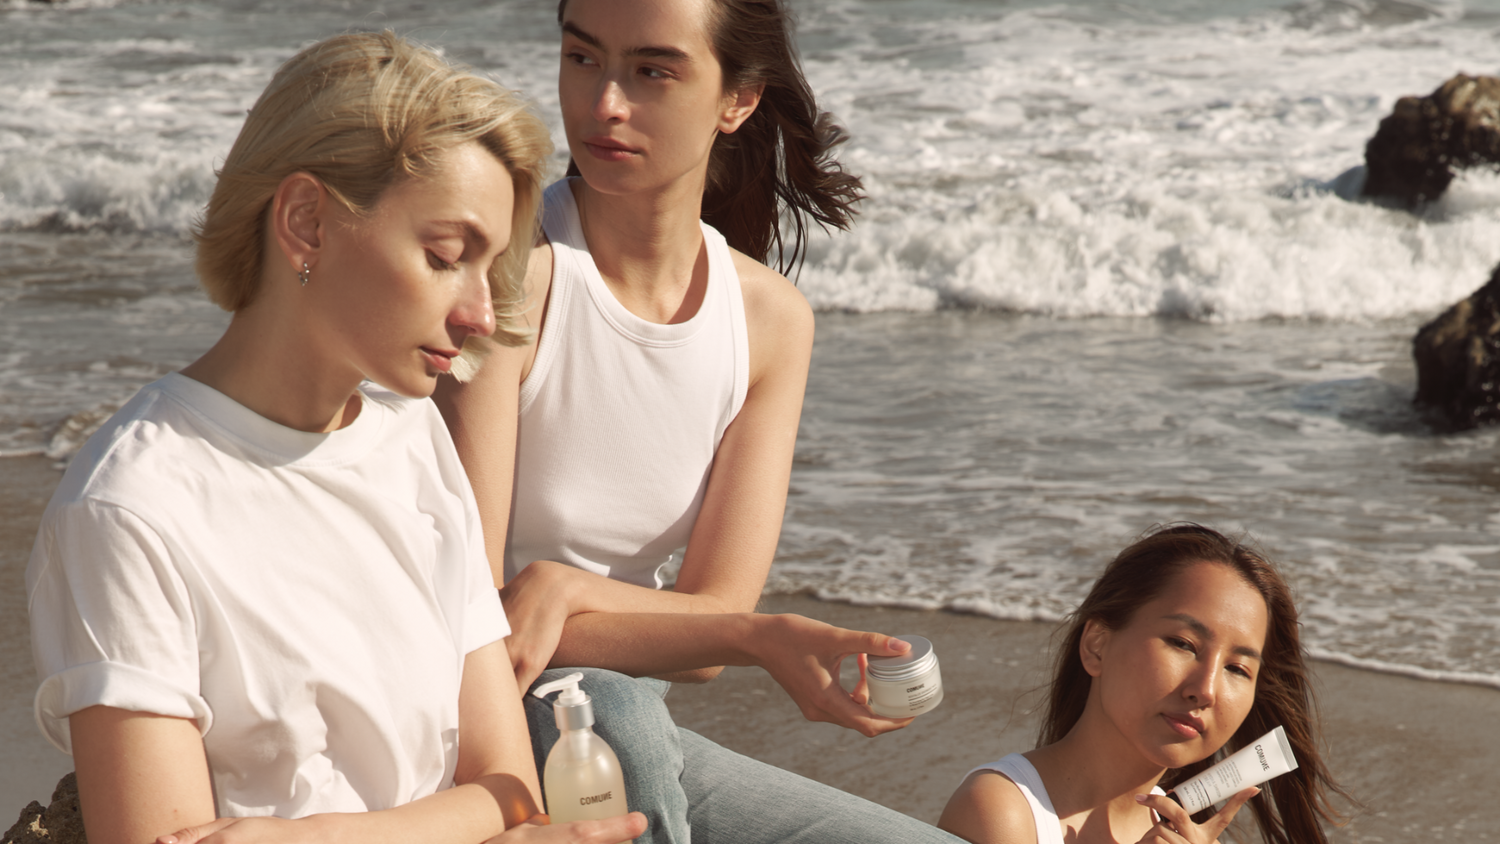 Comune Essentials Skincare showcased by three women sitting at the beach